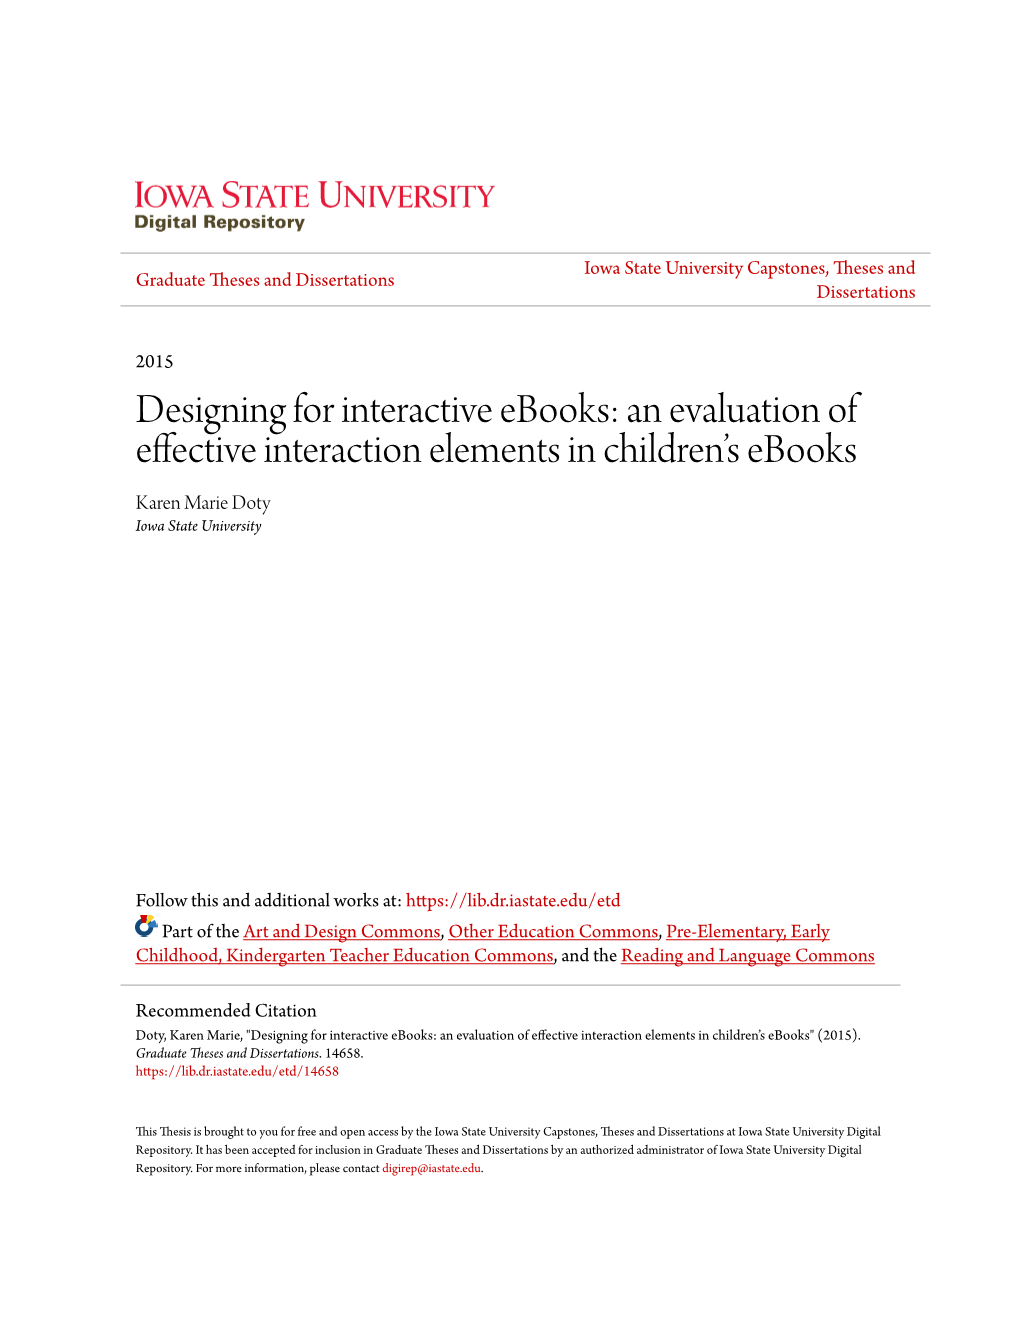 Designing for Interactive Ebooks: an Evaluation of Effective Interaction Elements in Children’S Ebooks Karen Marie Doty Iowa State University